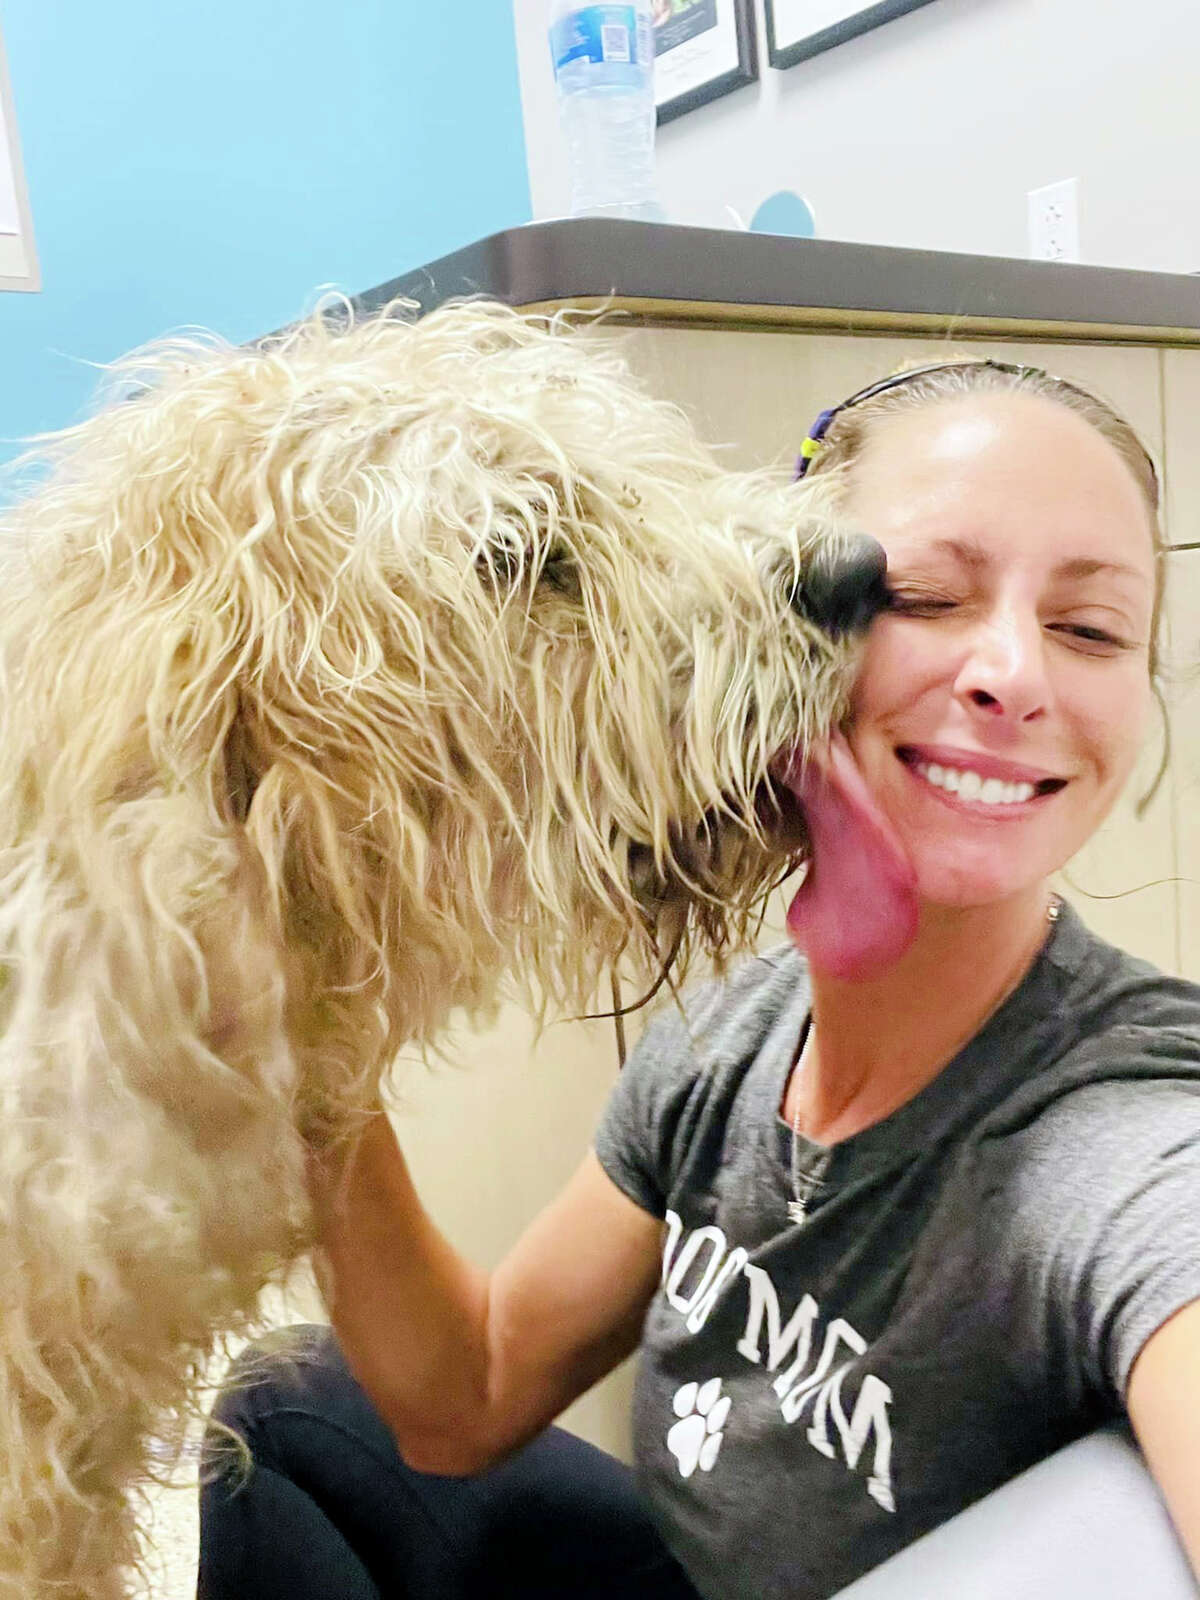 Tito the Otterhound welcomes Samantha Benack Miller to the Veterinary Clinic where the dog has been recovering from her weeks on the loose in Greater St.